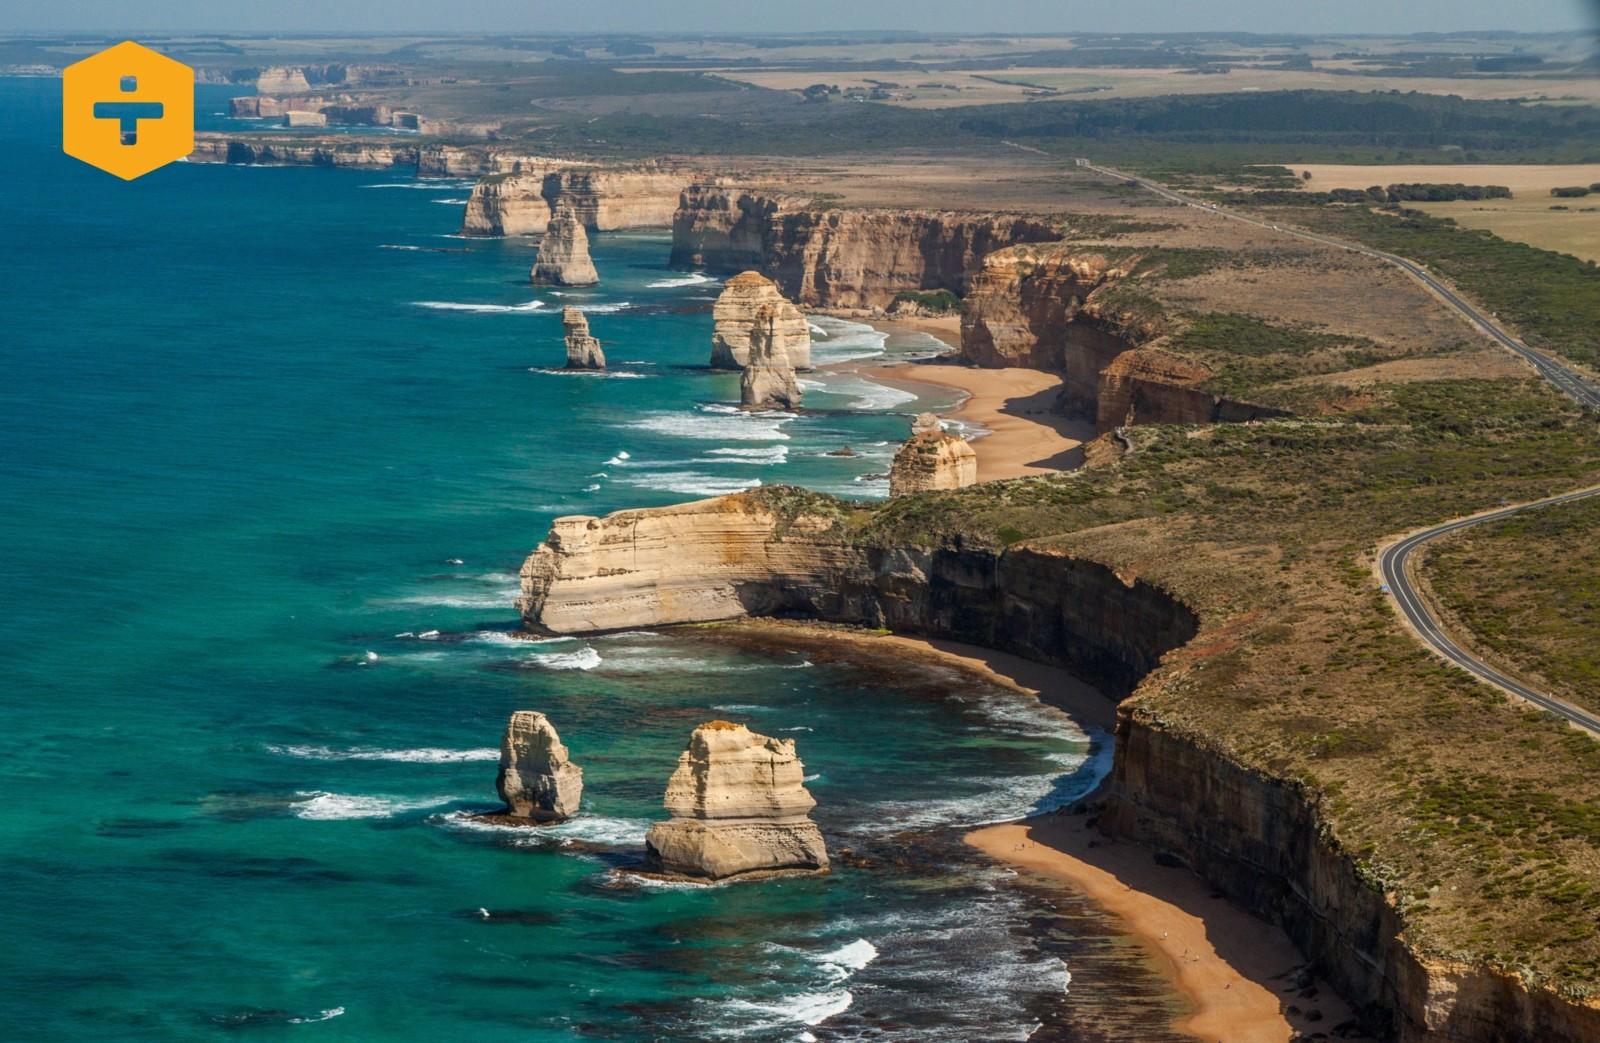 Managing the Great Ocean Road so that it continues to be a tourism drawcard into the future is a decade-long venture involving infrastructure investment.